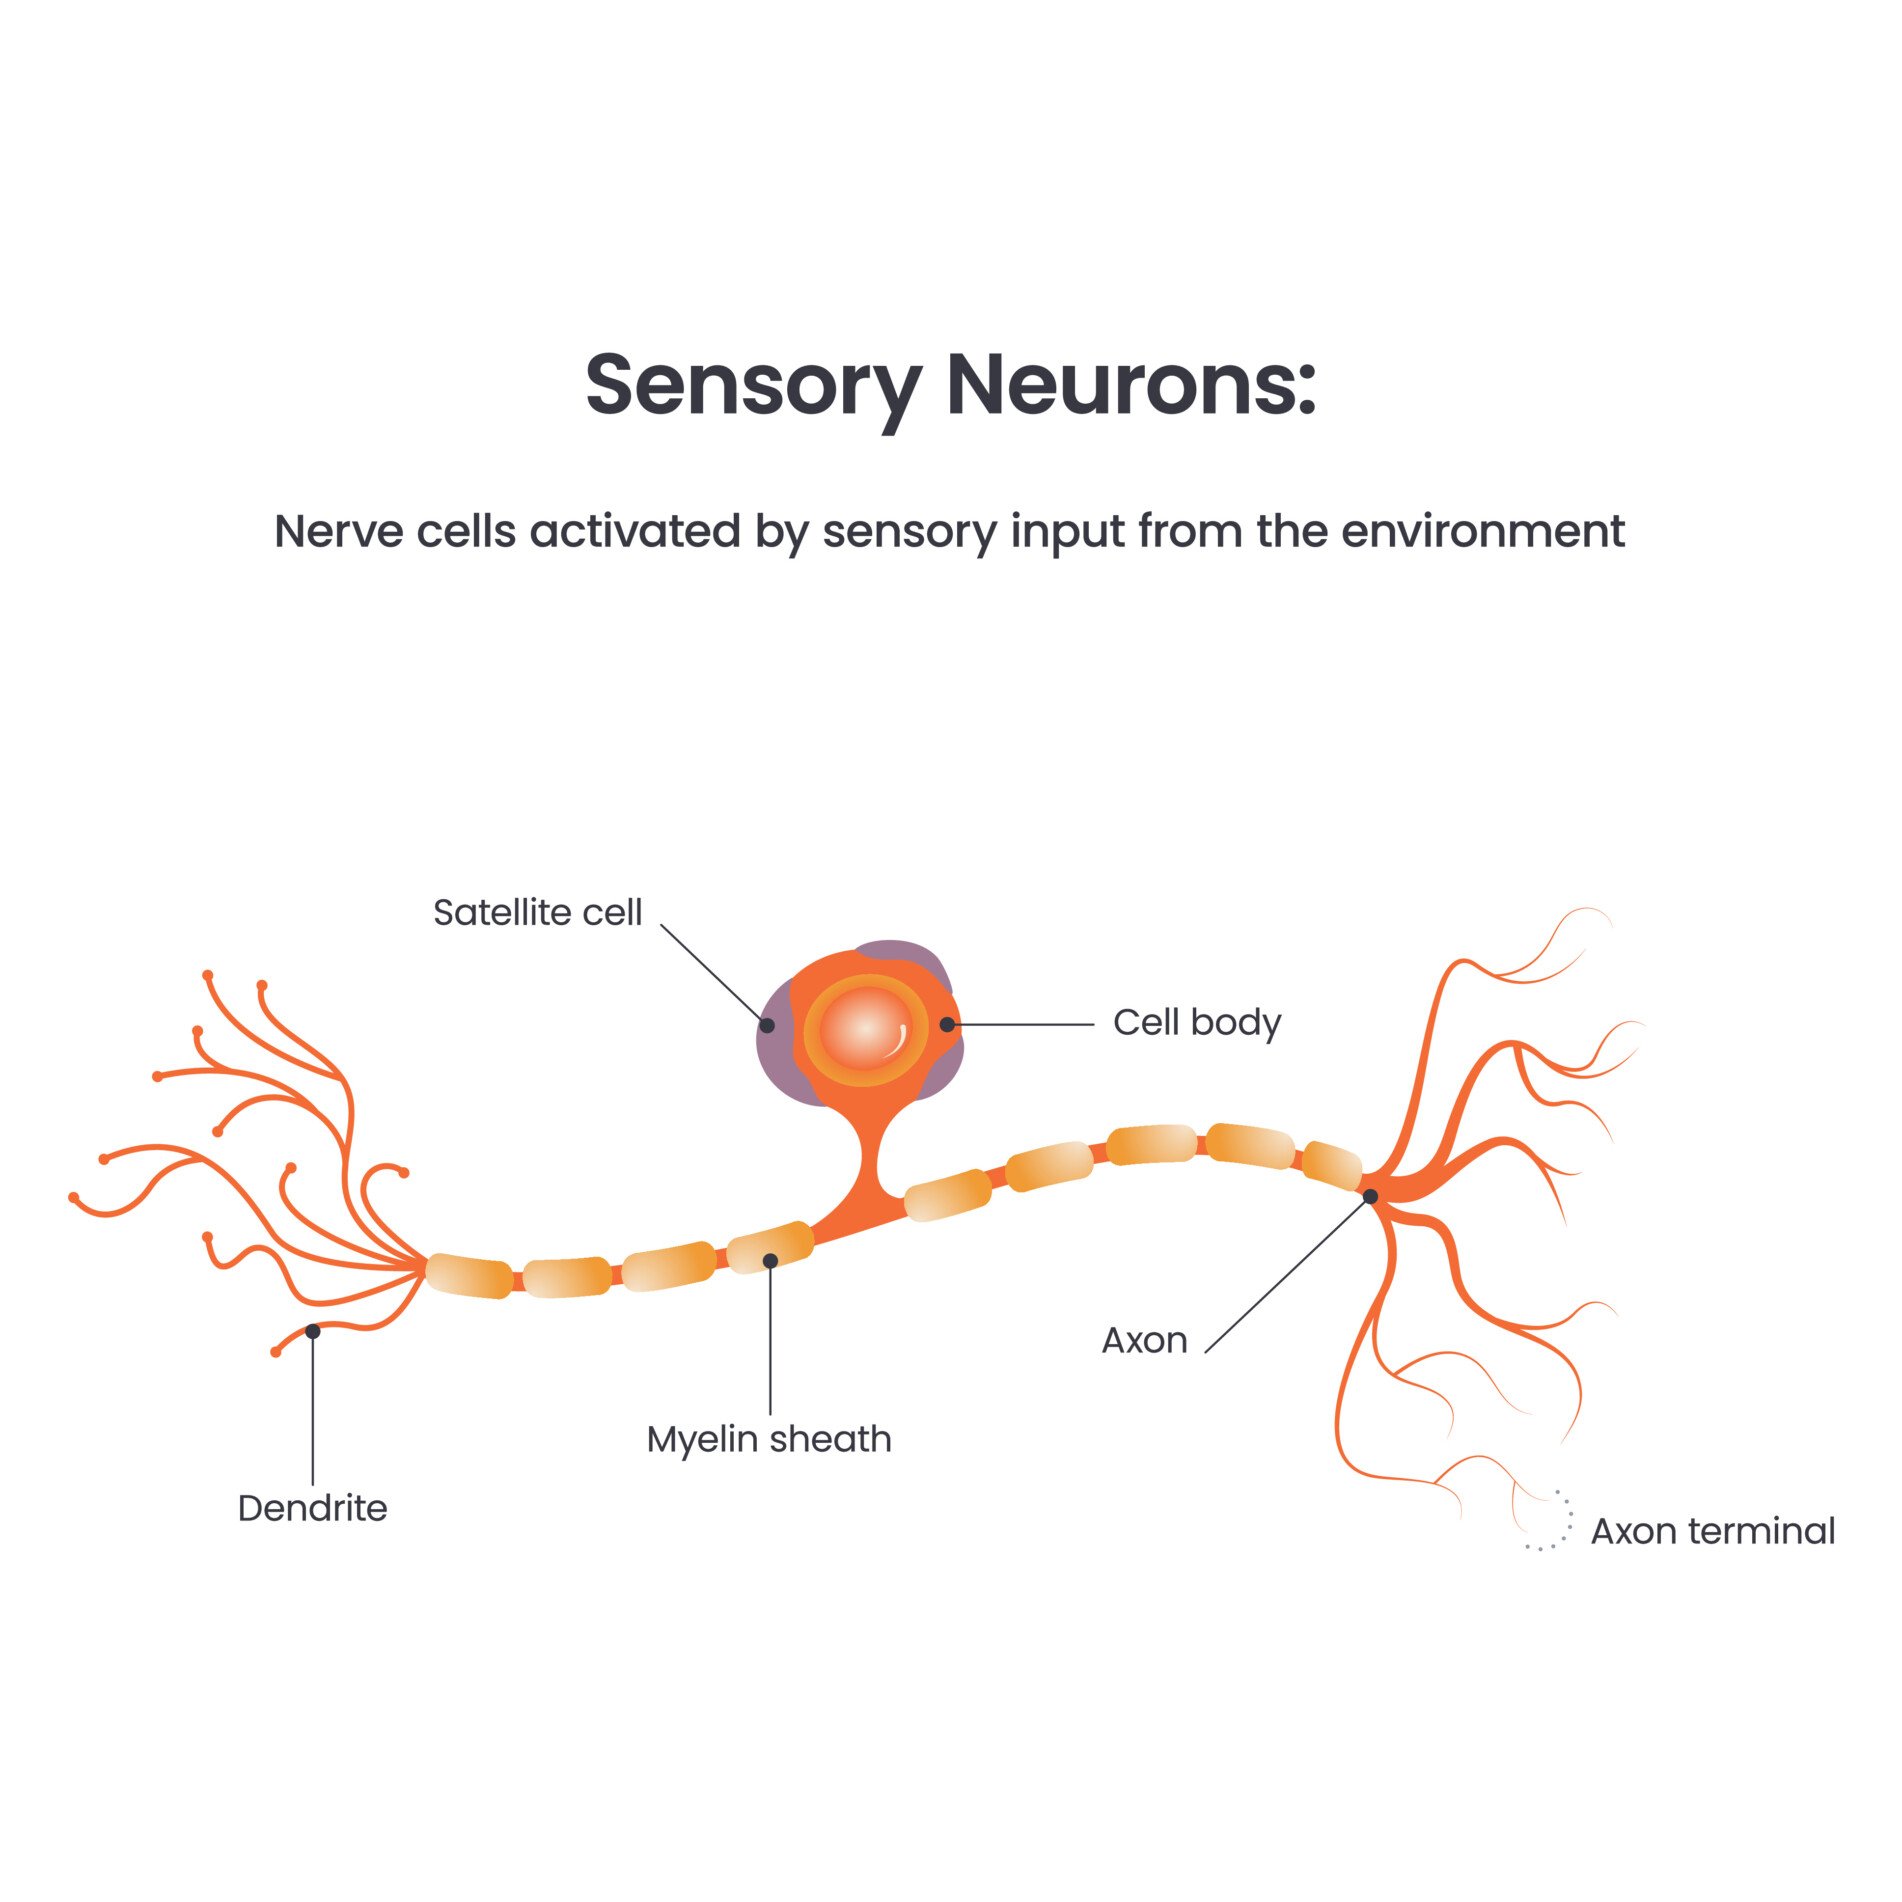 an illustration of a sensory neuron, with labelled parts